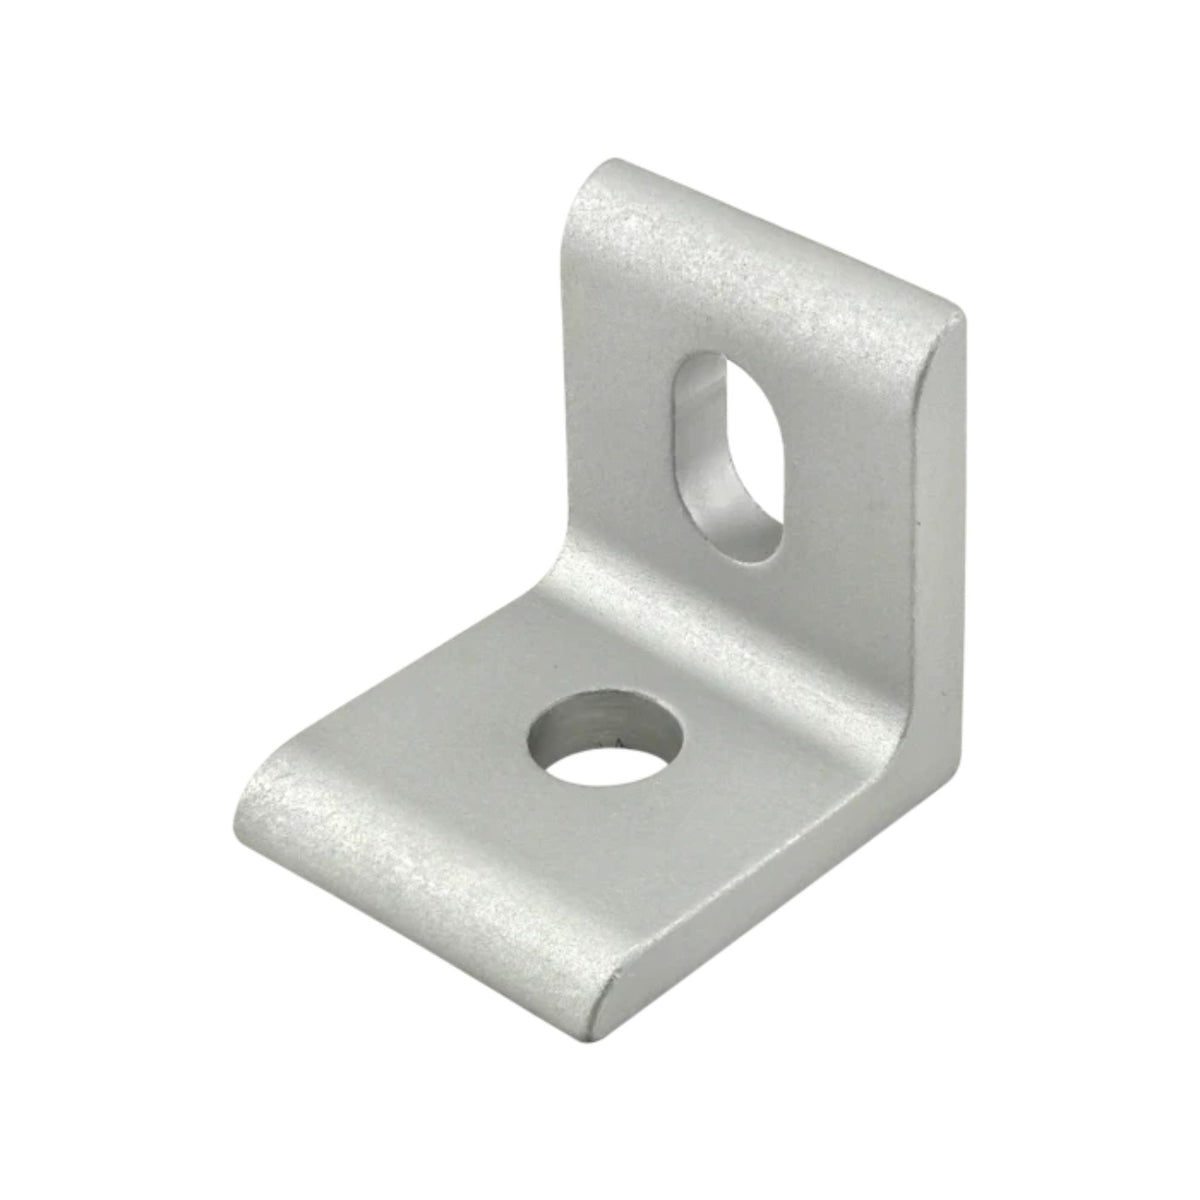 metal, l-shaped corner bracket with the corner on the right side and a mounting hole in each of the two sides